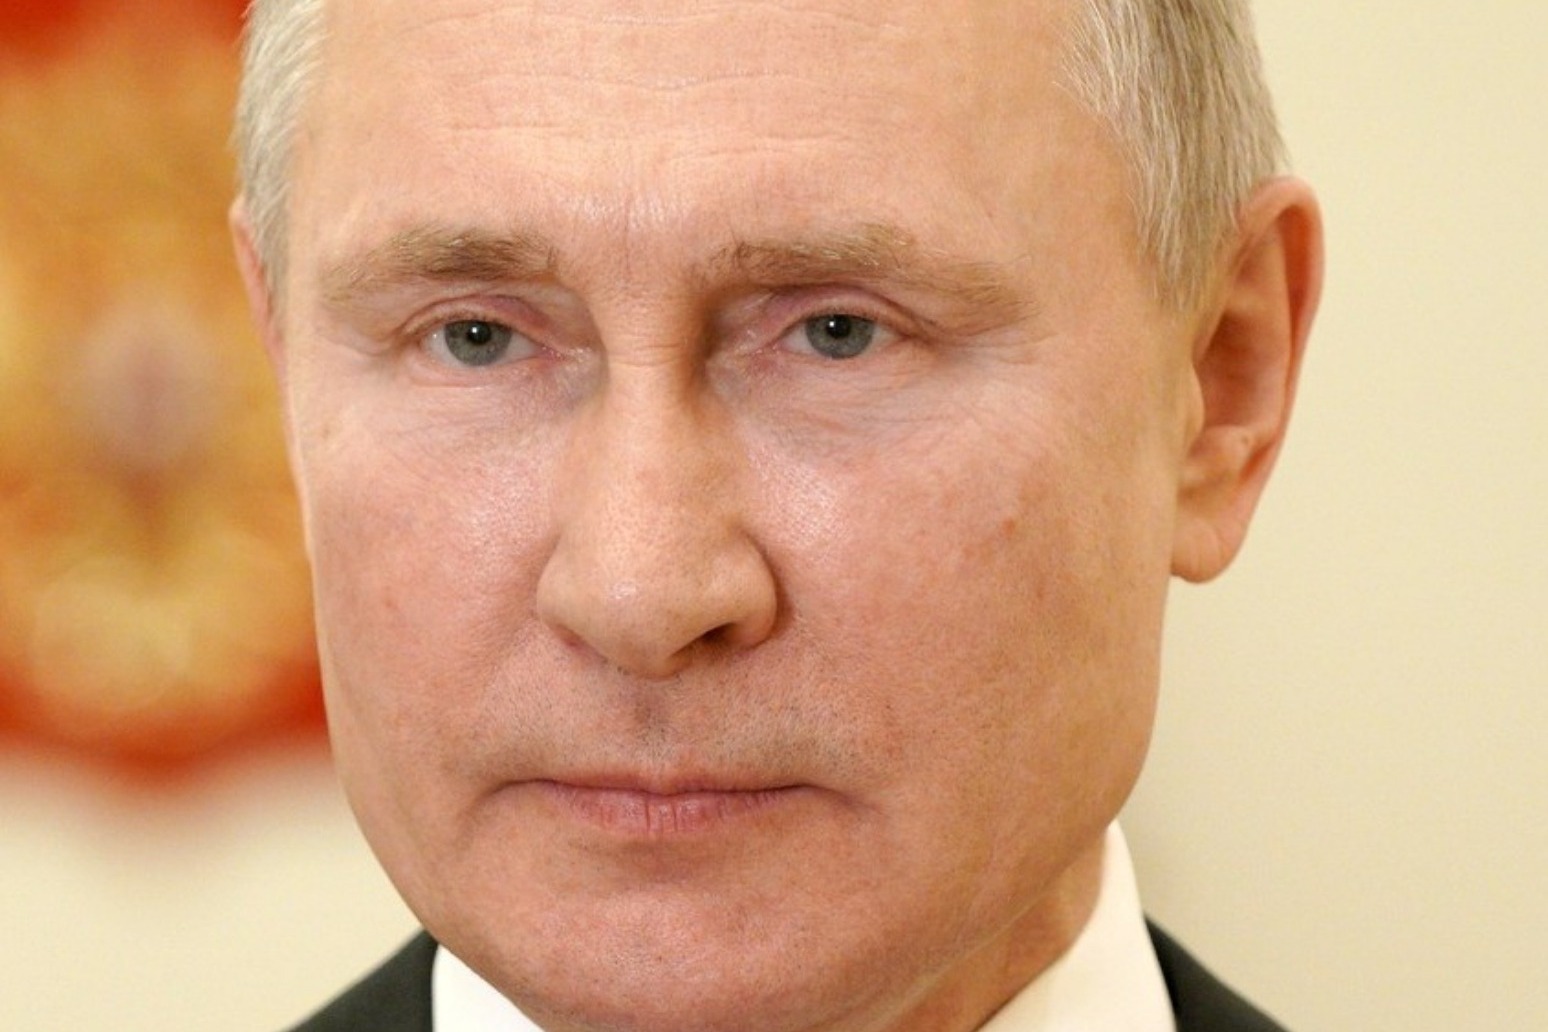 Putin says Russian offensive in Ukraine ‘response to Western policies’ 